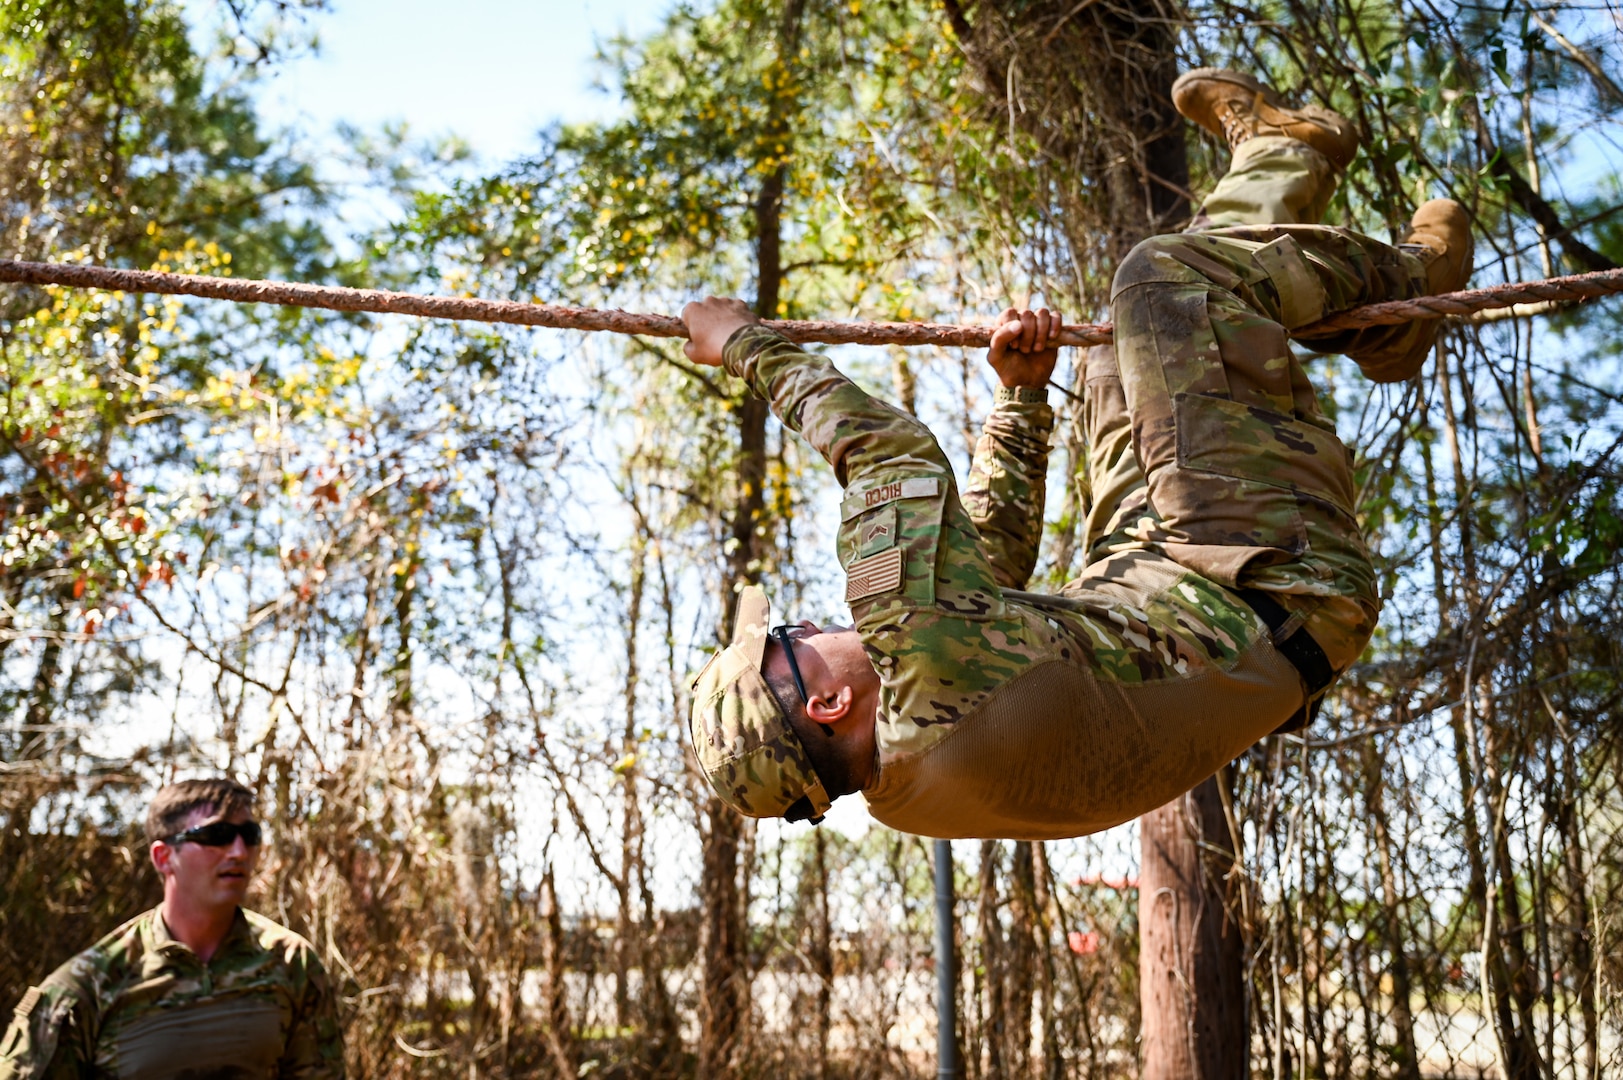 Airman 1st Class Colin Ricco, a security forces specialist at the 165th Security Forces Squadron, Georgia Air National Guard, completes the 11-task obstacle course March 12, 2021, in Savannah, Ga., during a tryout for the new 165th Strategic Response Team. The team will be a group of security forces Airmen who are highly trained and equipped to respond to emergencies requiring advanced police tactics.